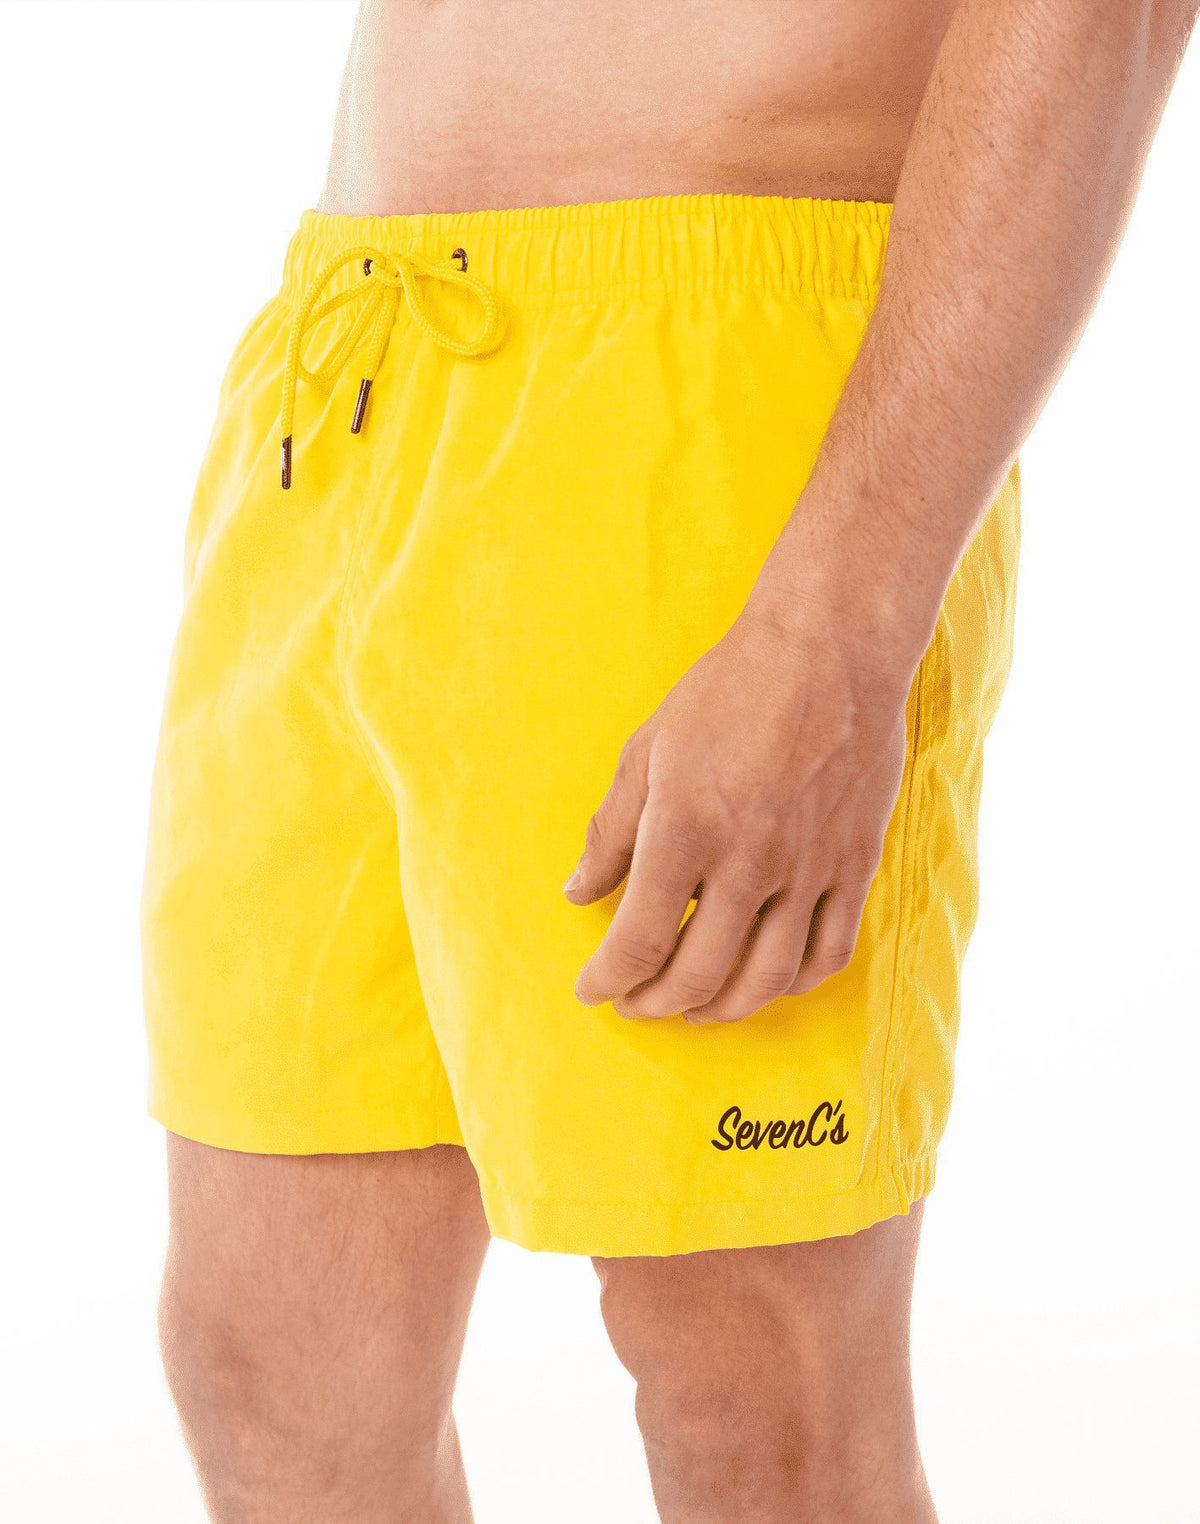 SevenC's Mens' Recycled Polyester Shorts in Yellow - Side View